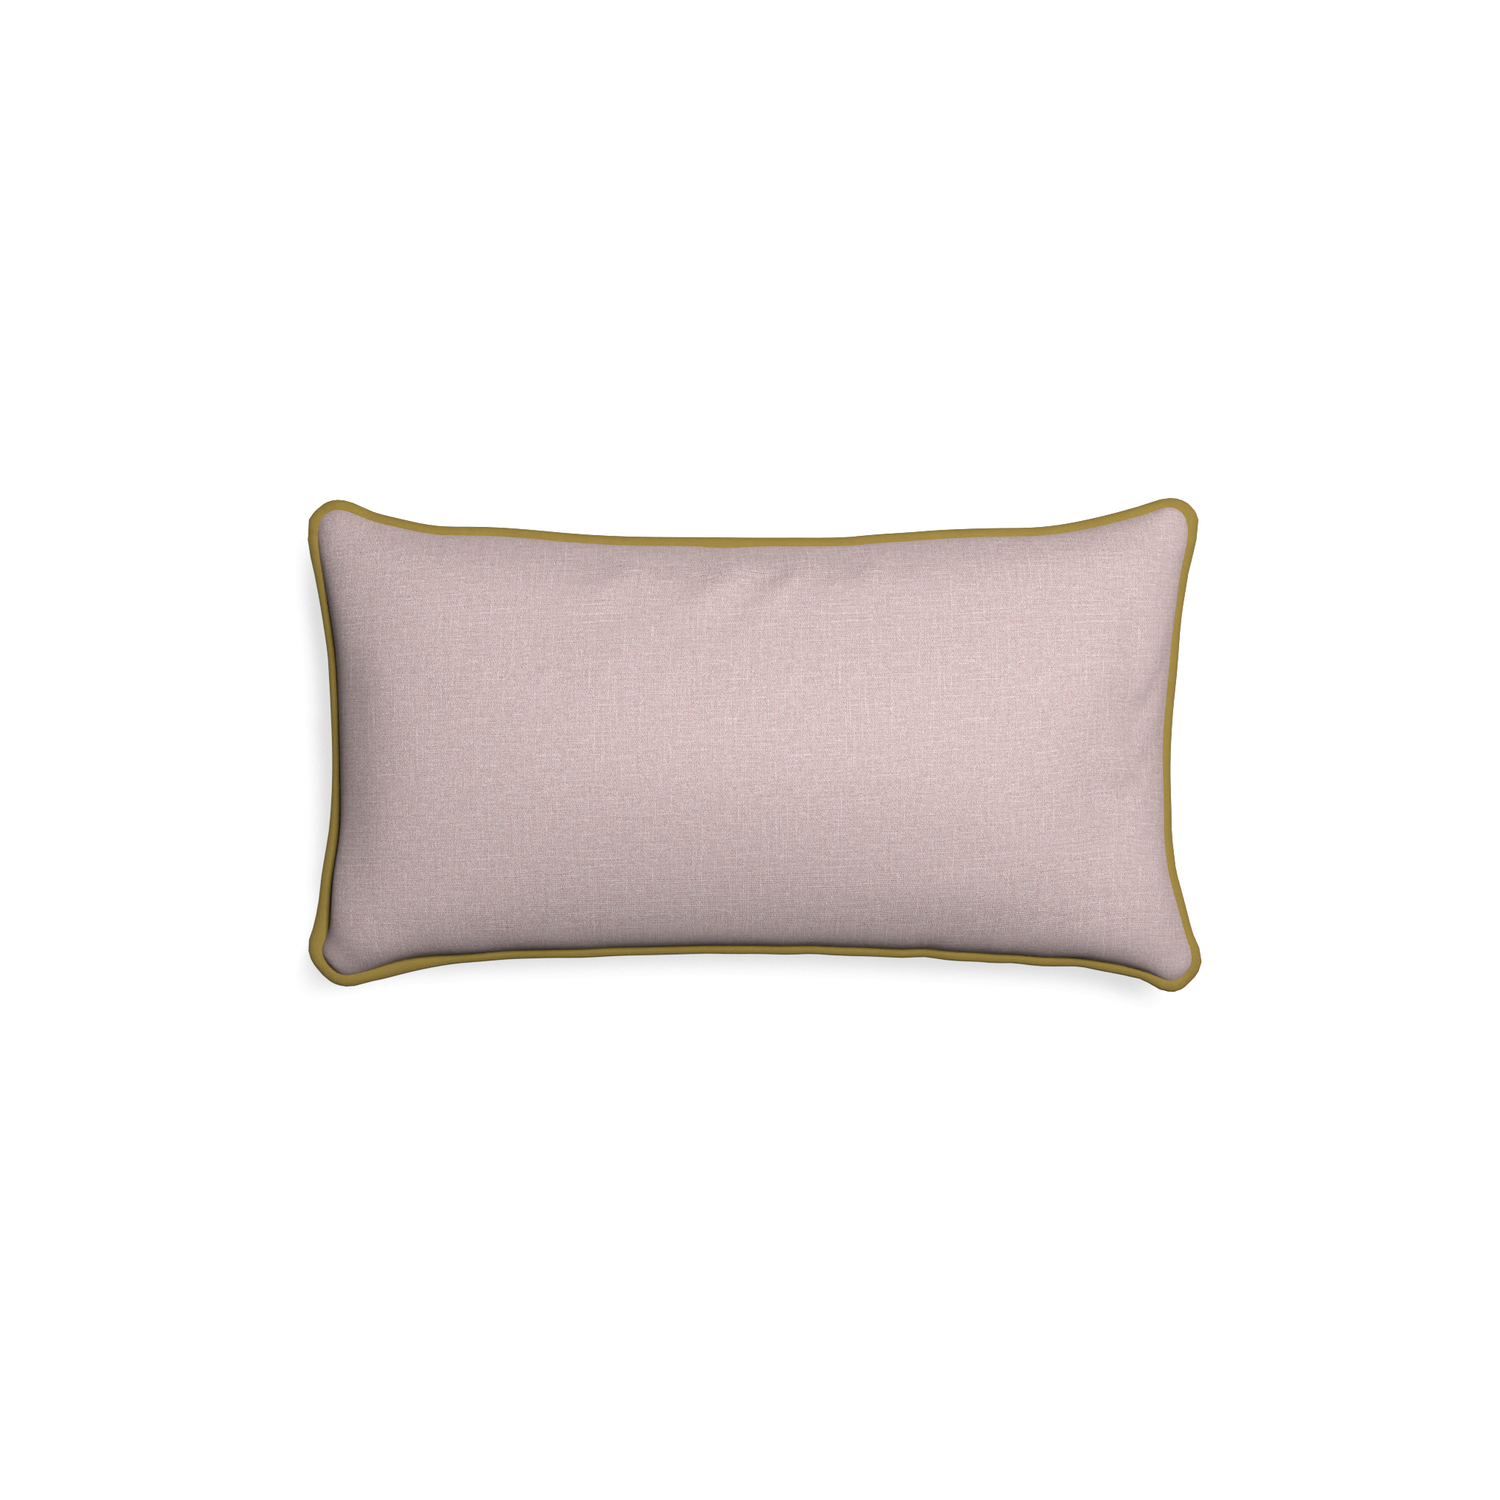 Petite-lumbar orchid custom mauve pinkpillow with c piping on white background